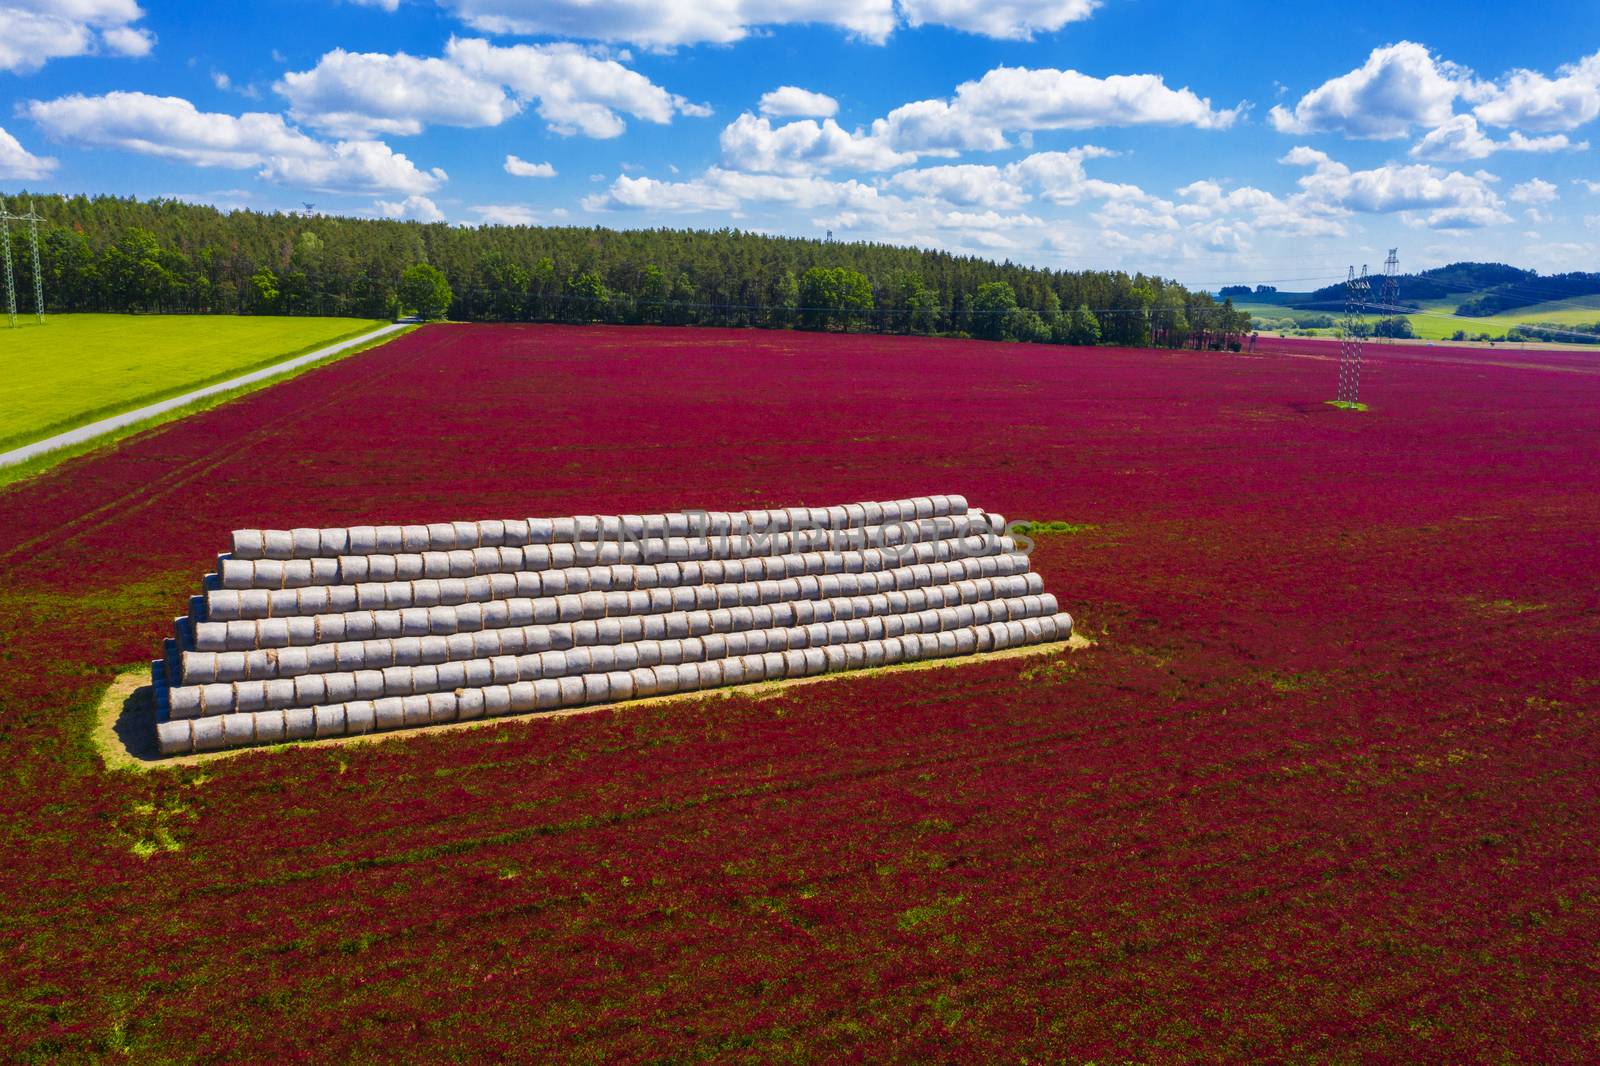 Crimson clover field with heap of bales from above by fyletto